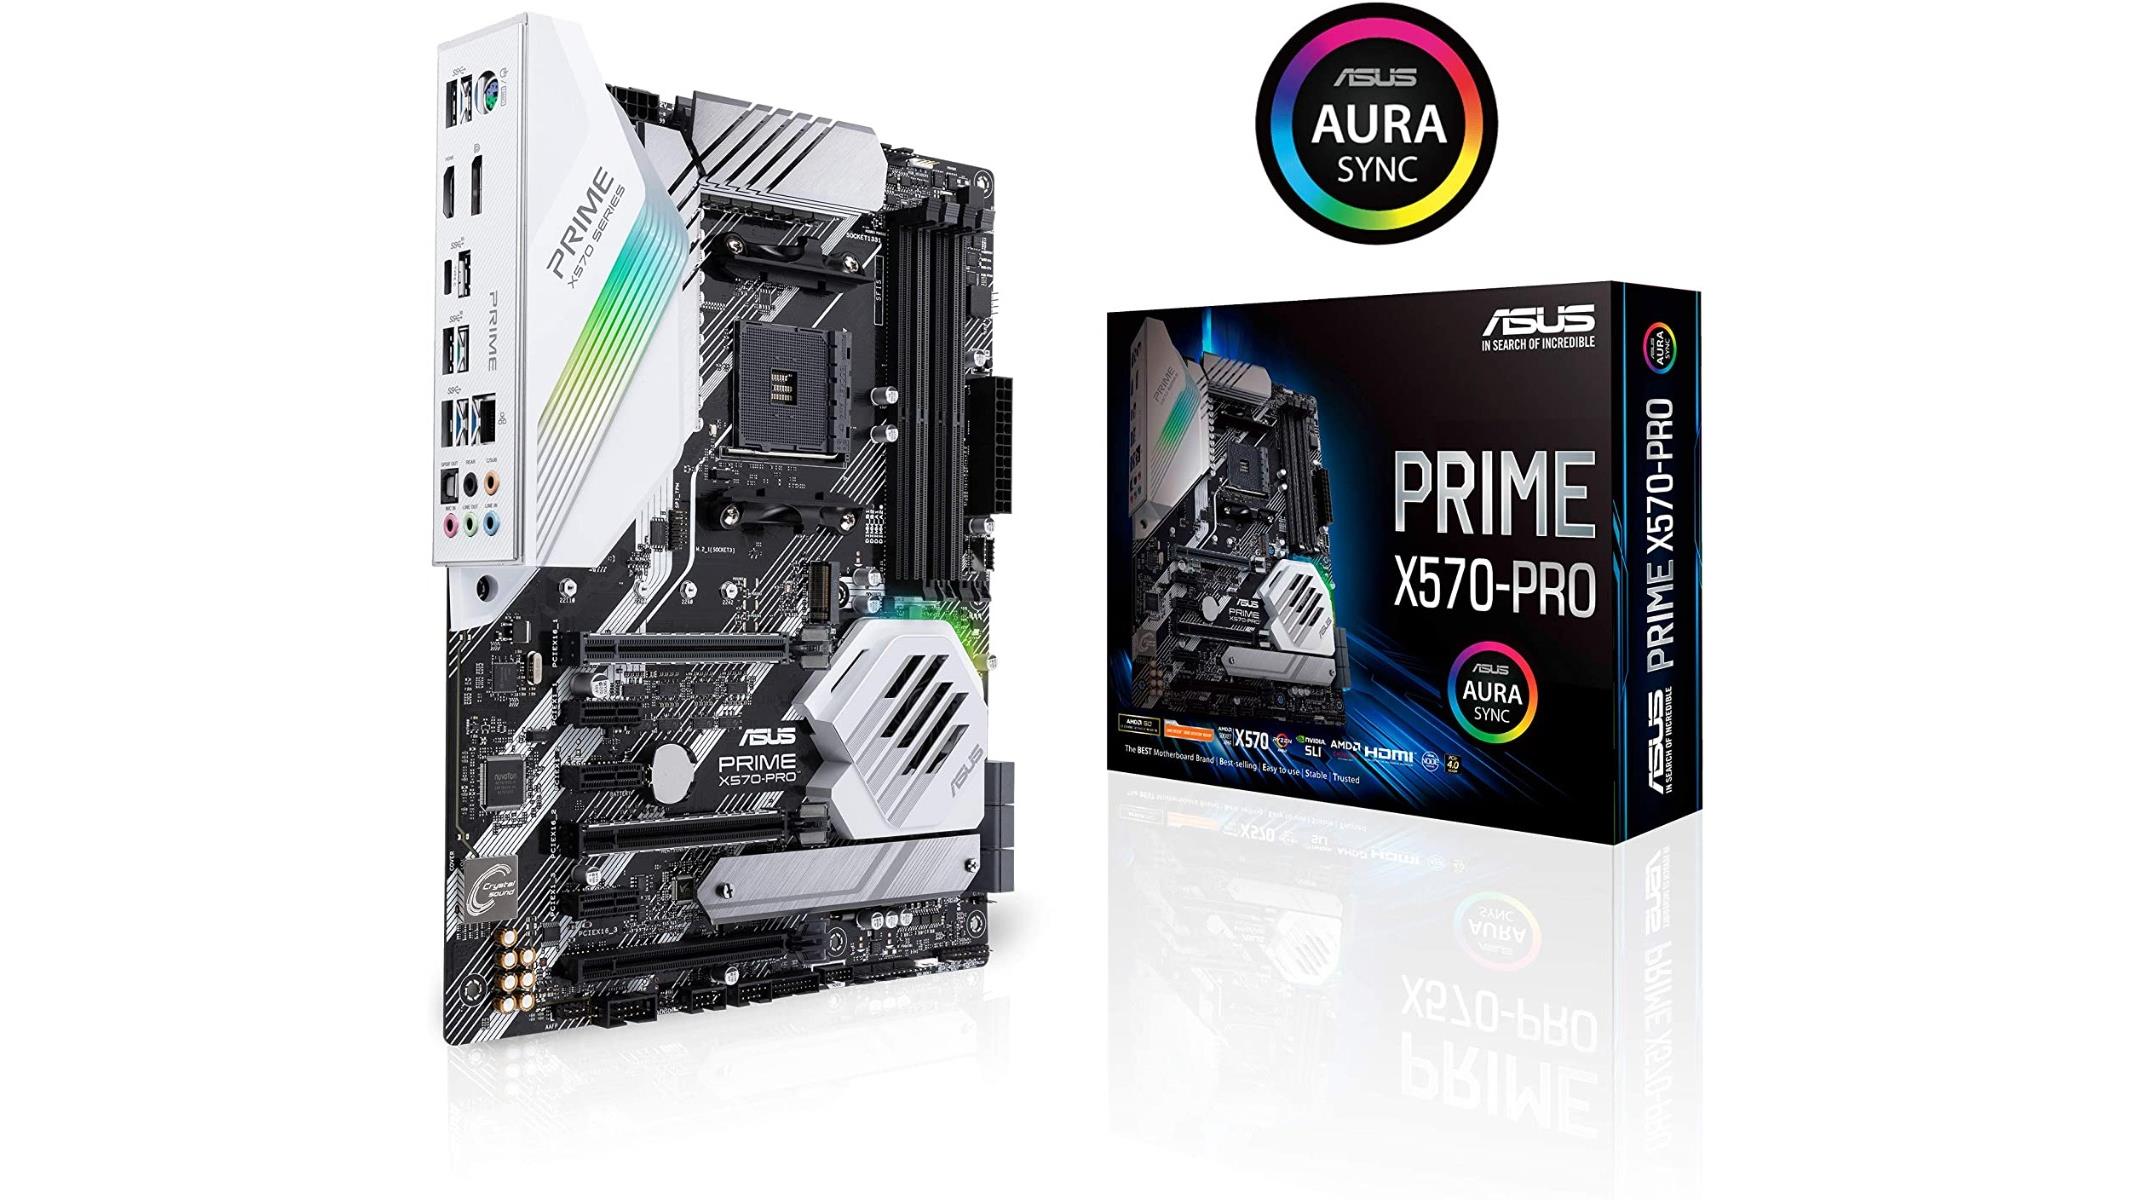 Asus Agesa 1 2 0 2 Motherboard Bios Updates Land To Fix Ryzen Usb Connectivity Woes Hothardware